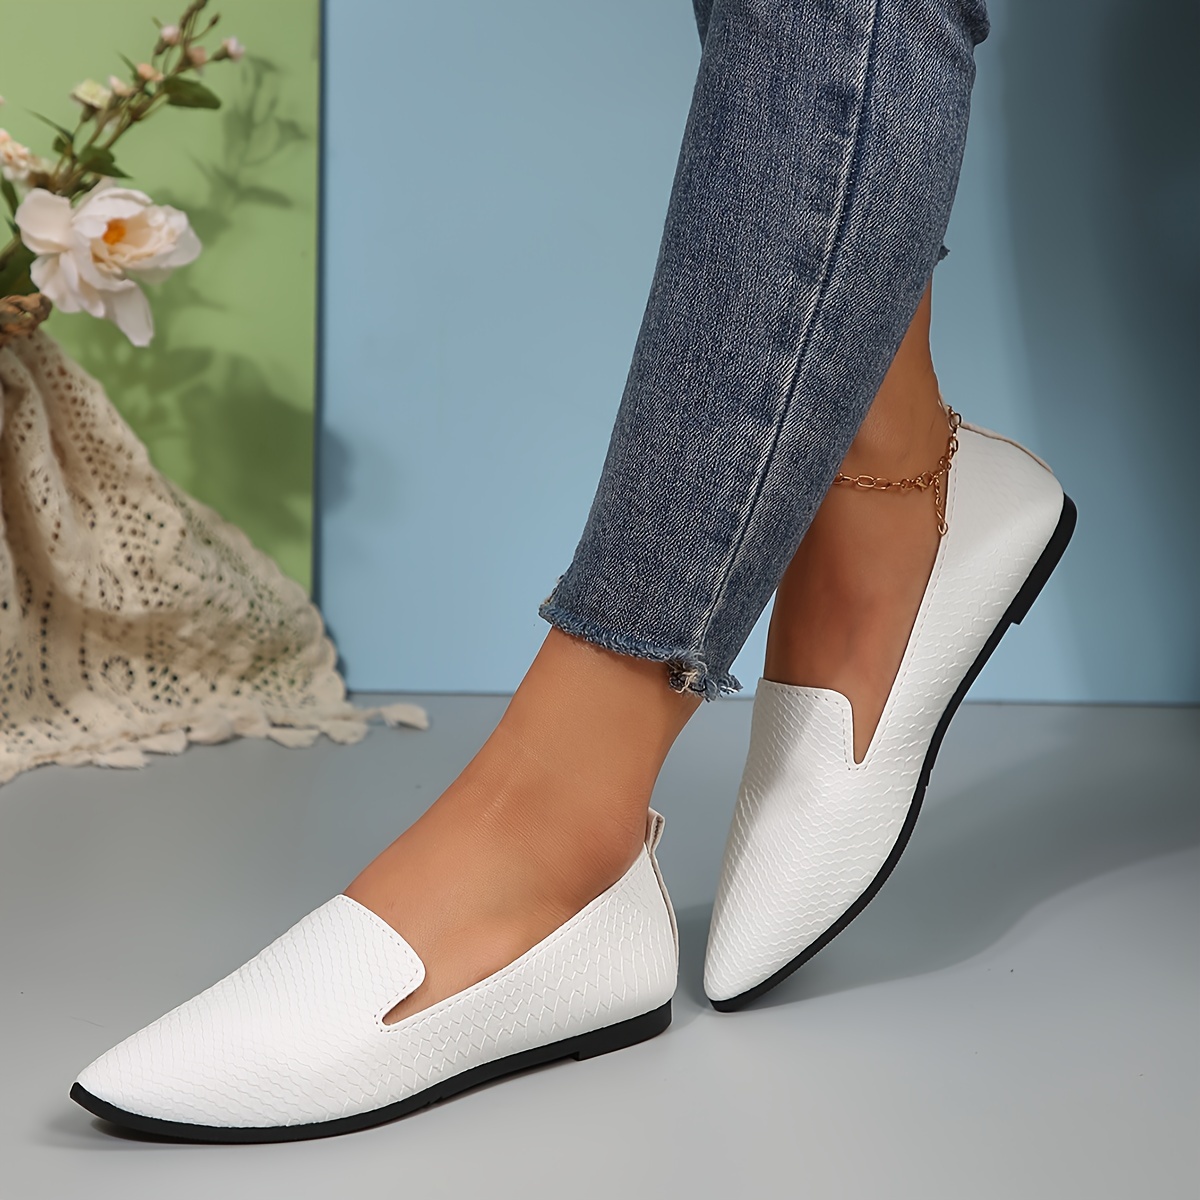 

Women's Solid Color Flat Shoes, Pointed Toe Slip On Shoes, Comfy Versatile Daily Wear Flats